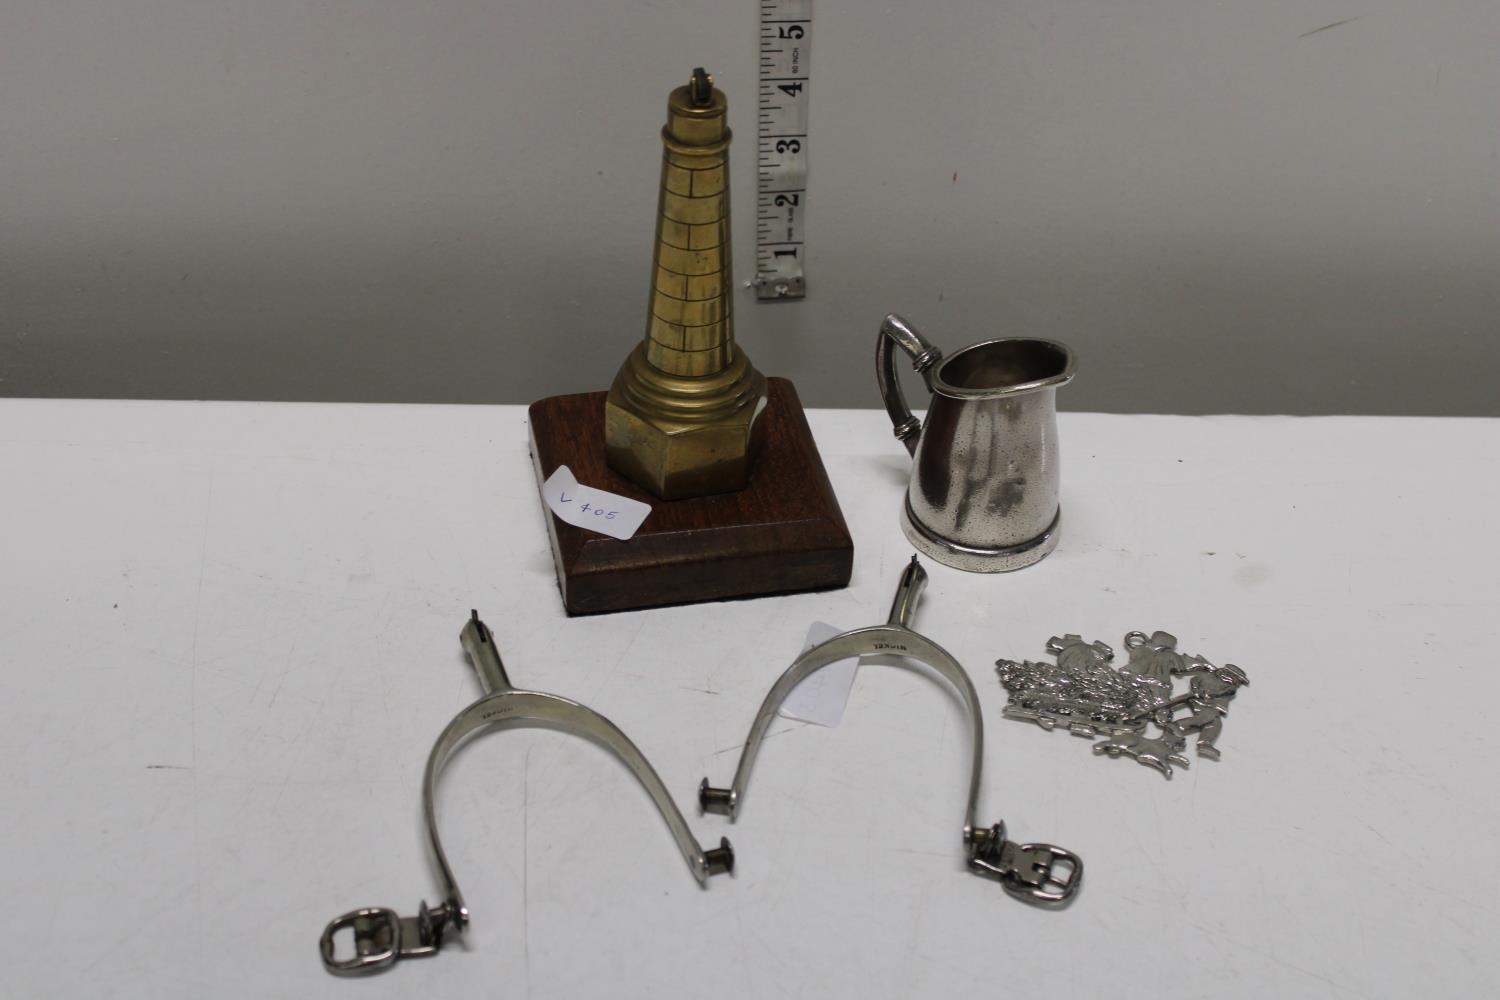 A job lot of assorted collectables including antique stirrups and novelty lighter